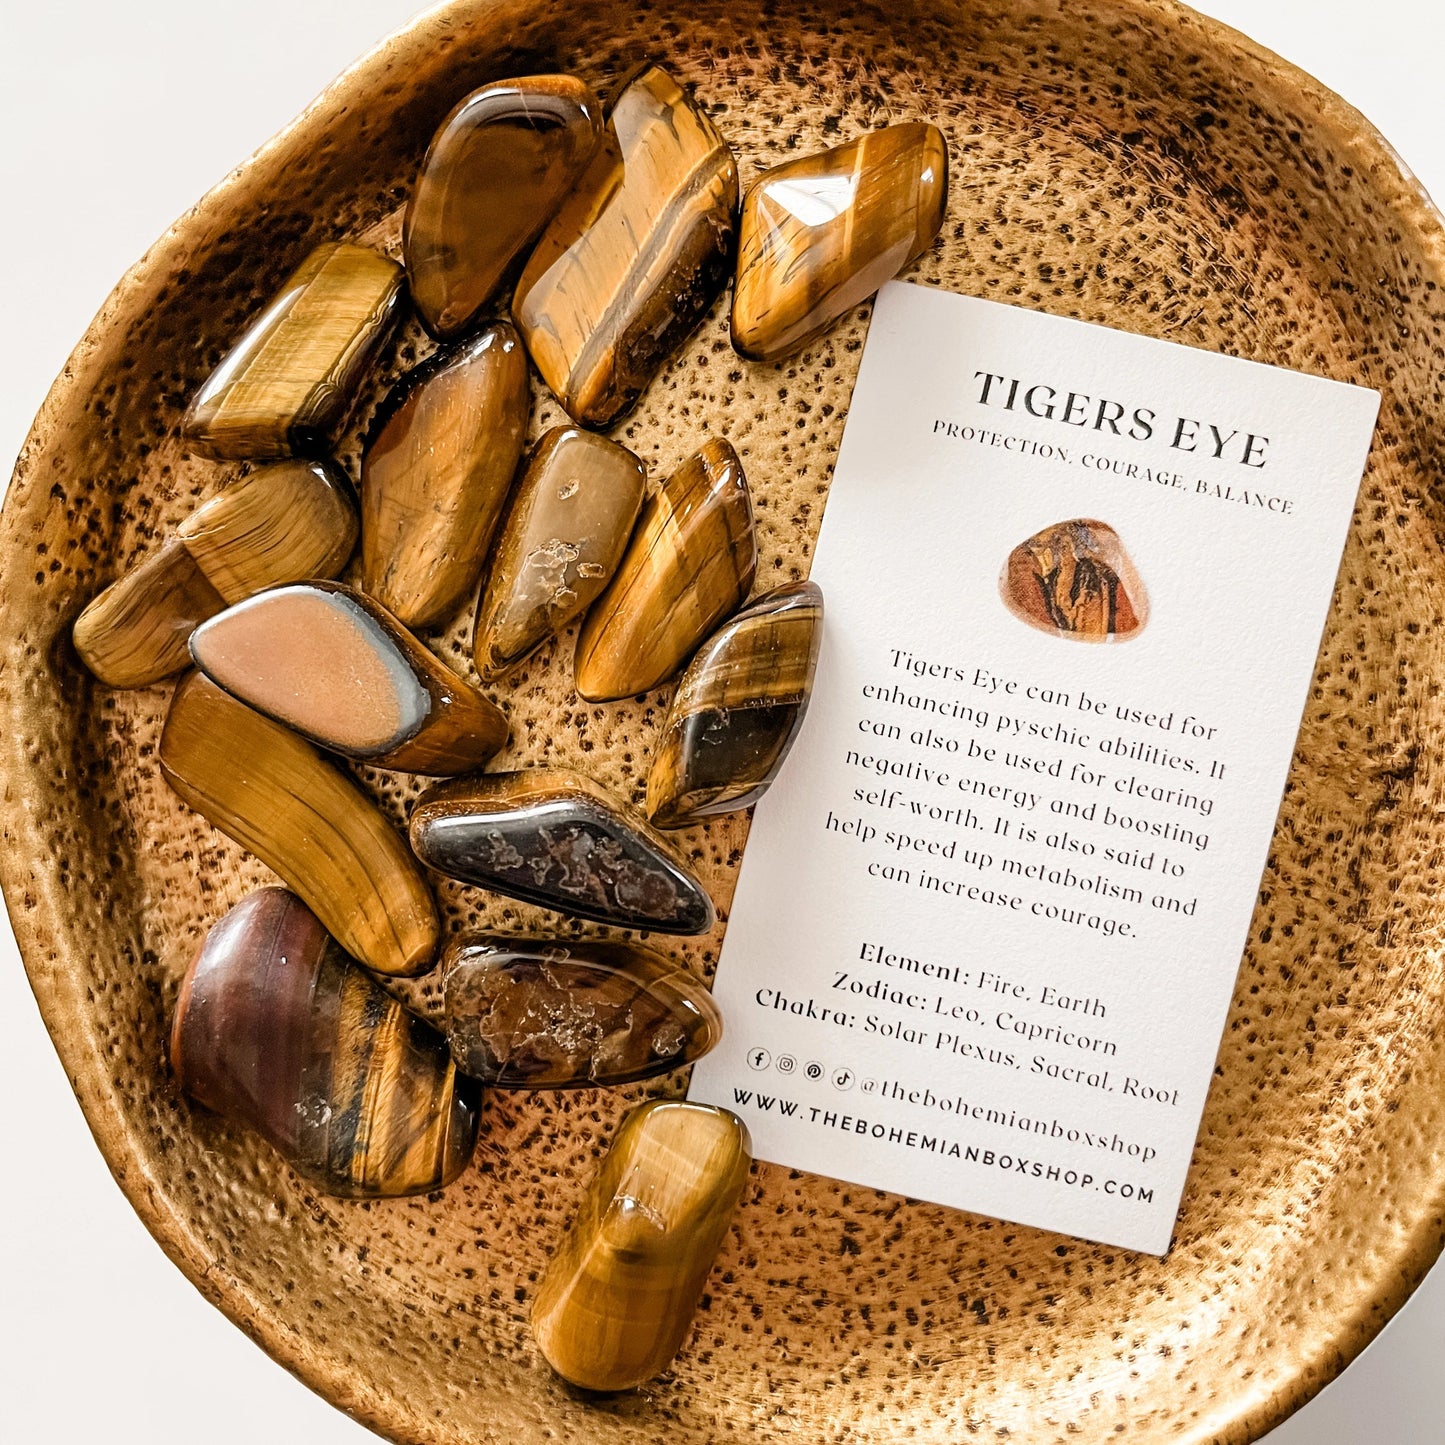 Tigers Eye Tumbled Stone with complementary keepsake information card